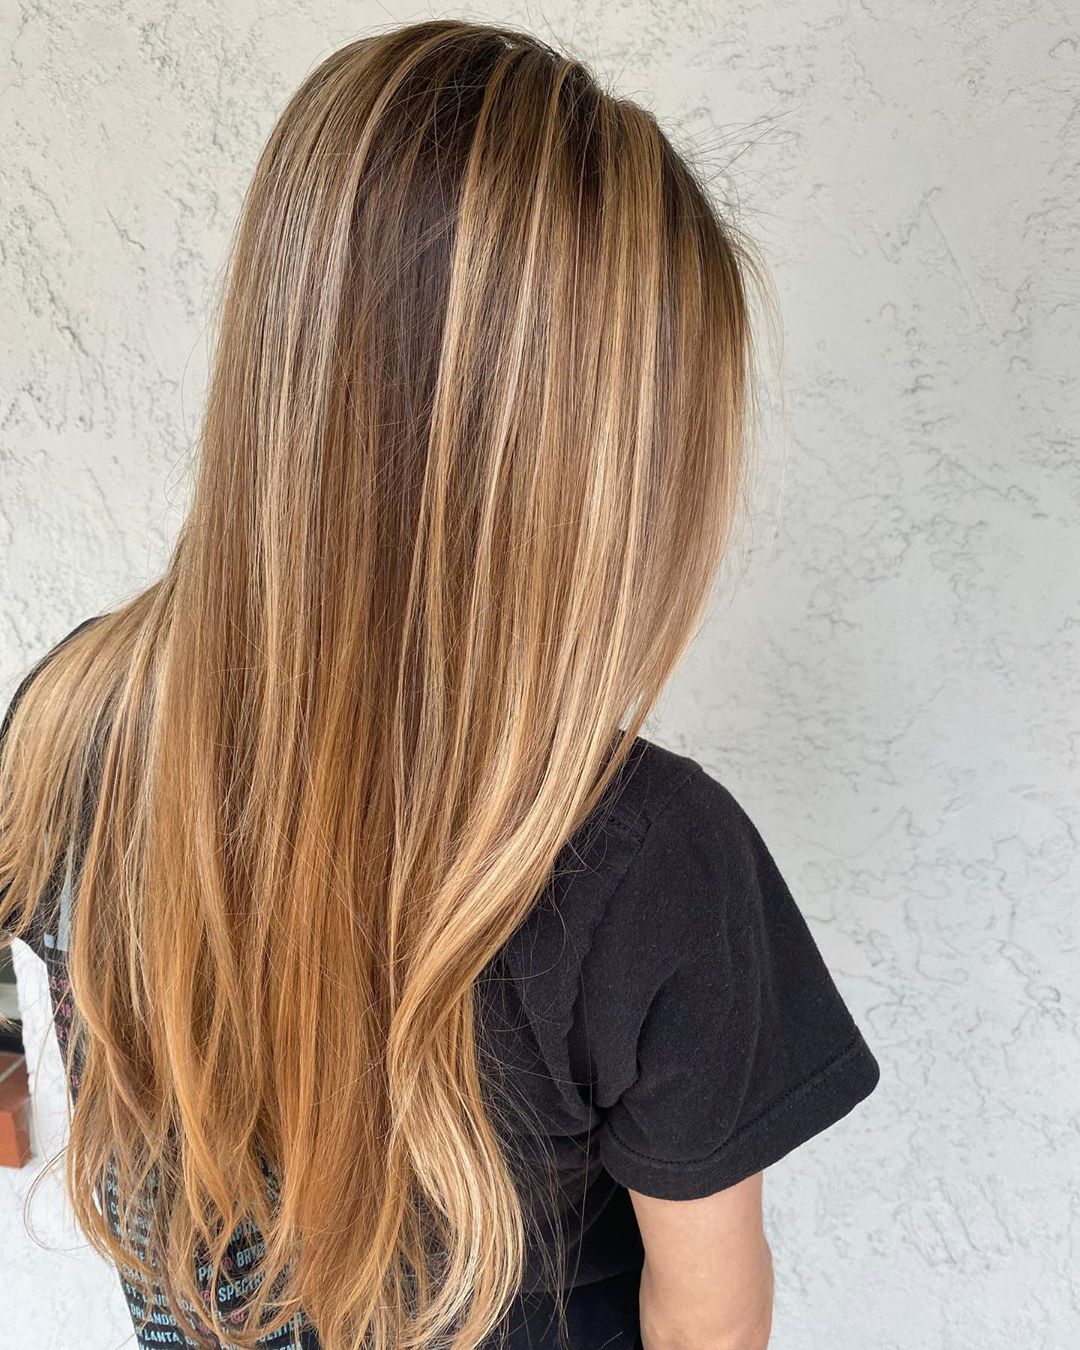 20 Sweetest Caramel Blonde Hair Color Ideas You'll See This Year